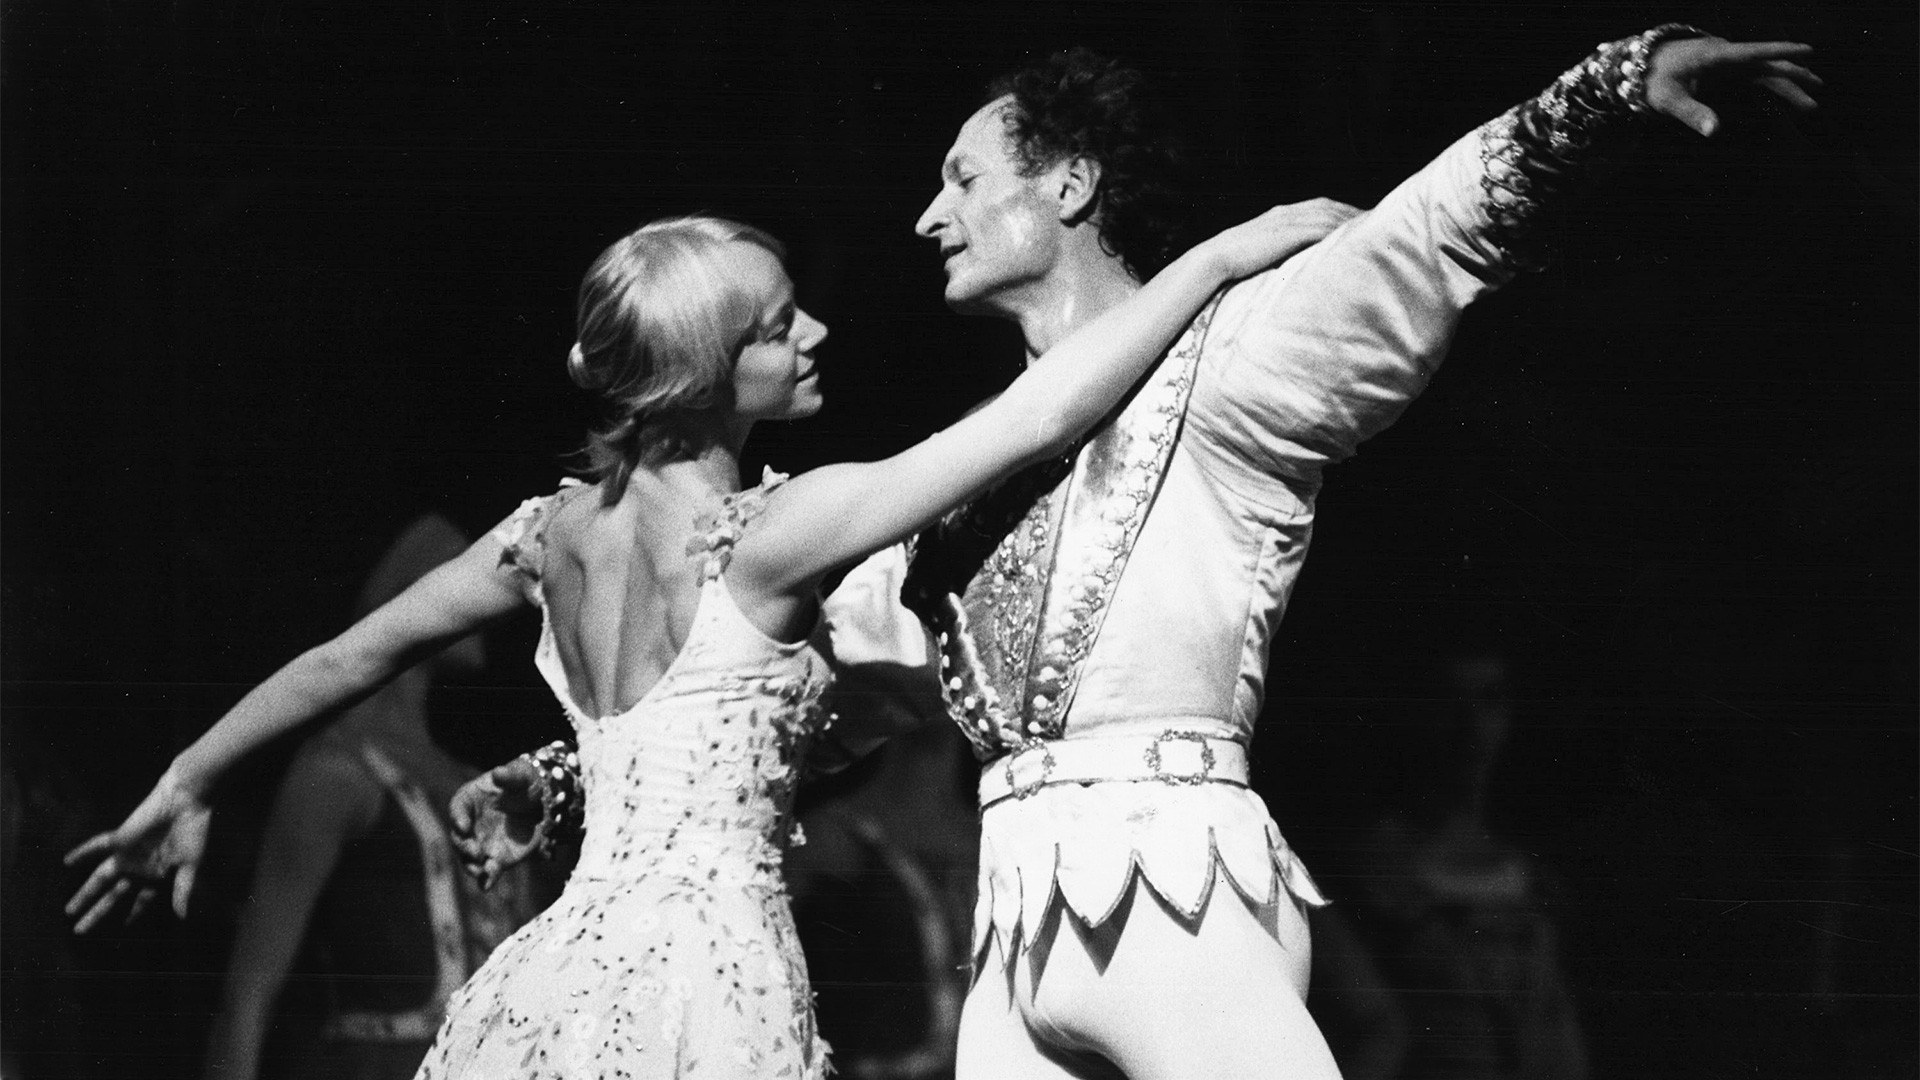 Russian dancers Galina Panova and her husband Valery Panov are pictured during rehearsal with the Berlin Opera Ballet Production of "Cinderella" at the New York State Theater of the Lincoln Center for the performing arts, July 6, 1978. 